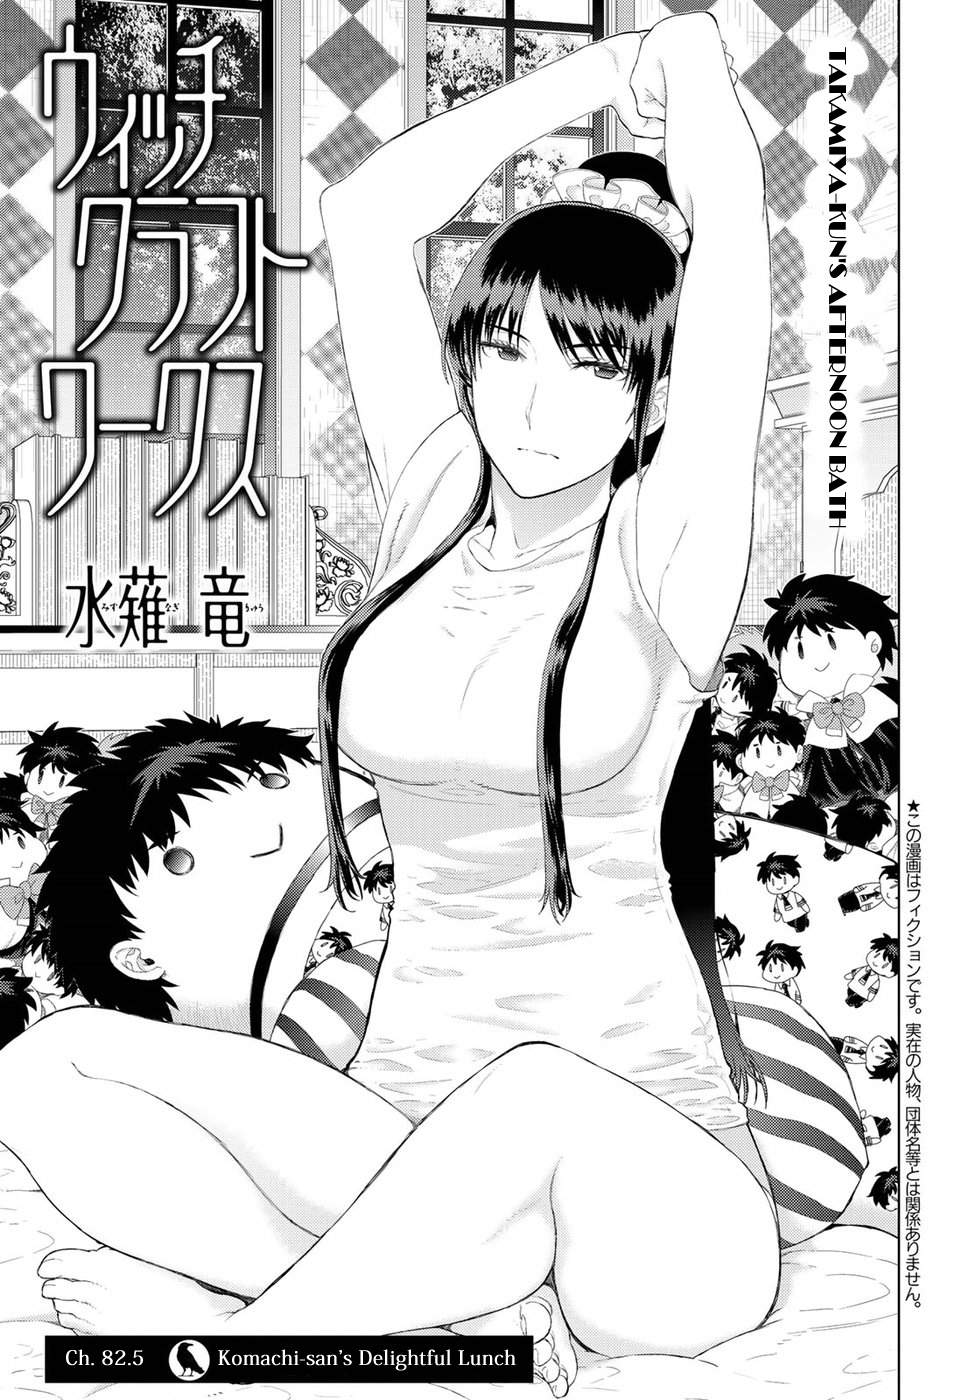 Witchcraft Works Chapter 82.5: Komachi-San Delightful Lunch - Picture 1